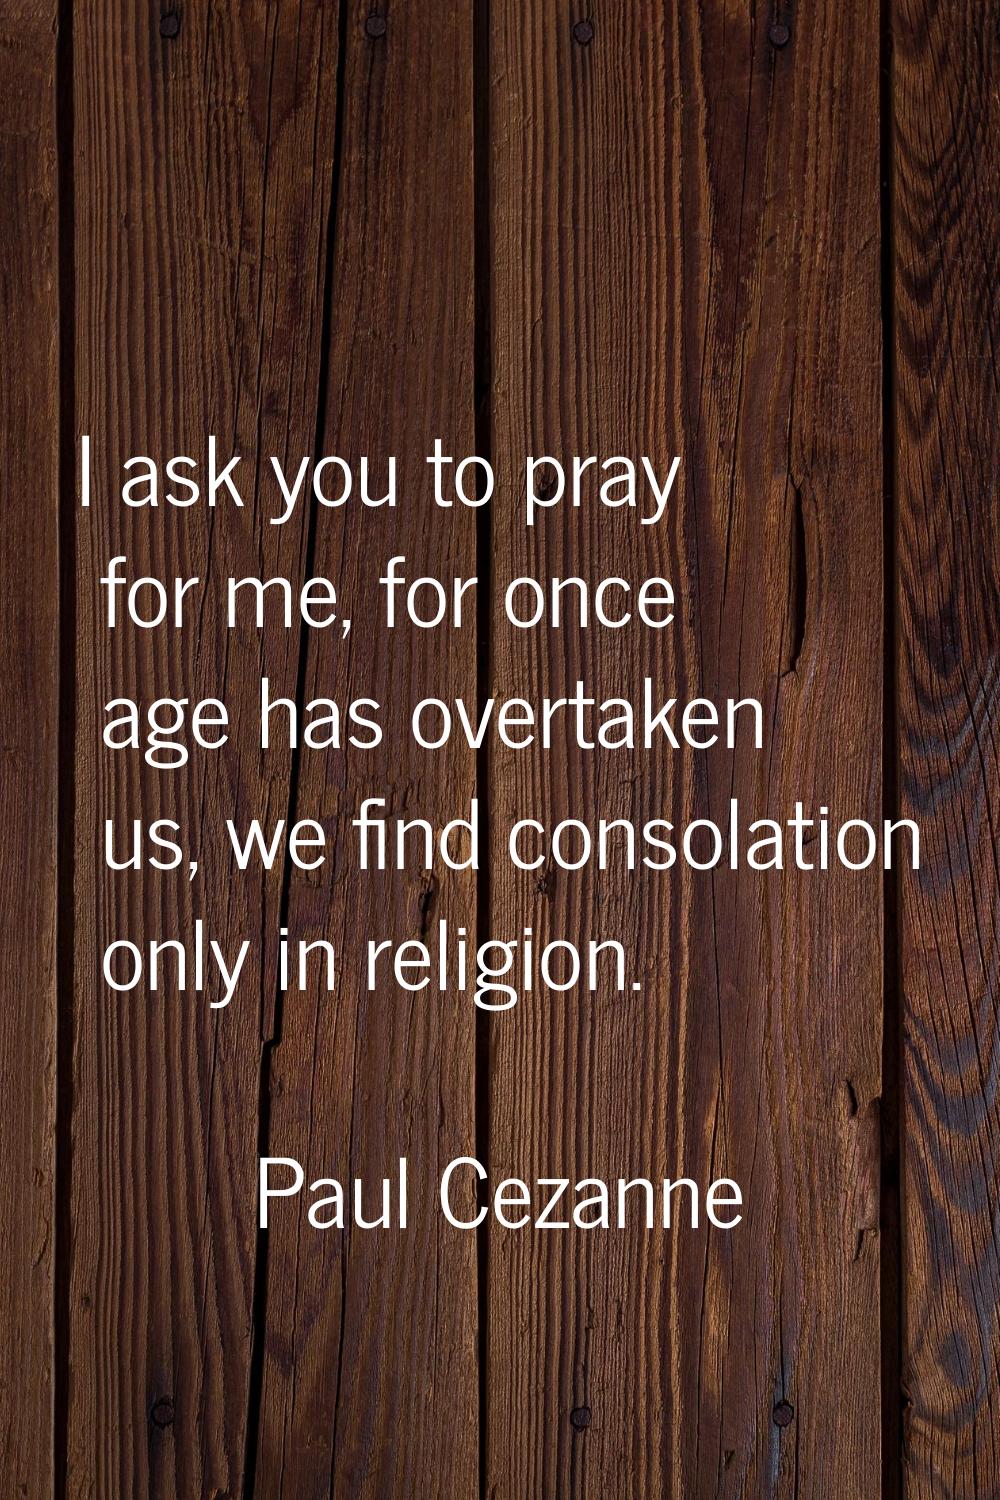 I ask you to pray for me, for once age has overtaken us, we find consolation only in religion.